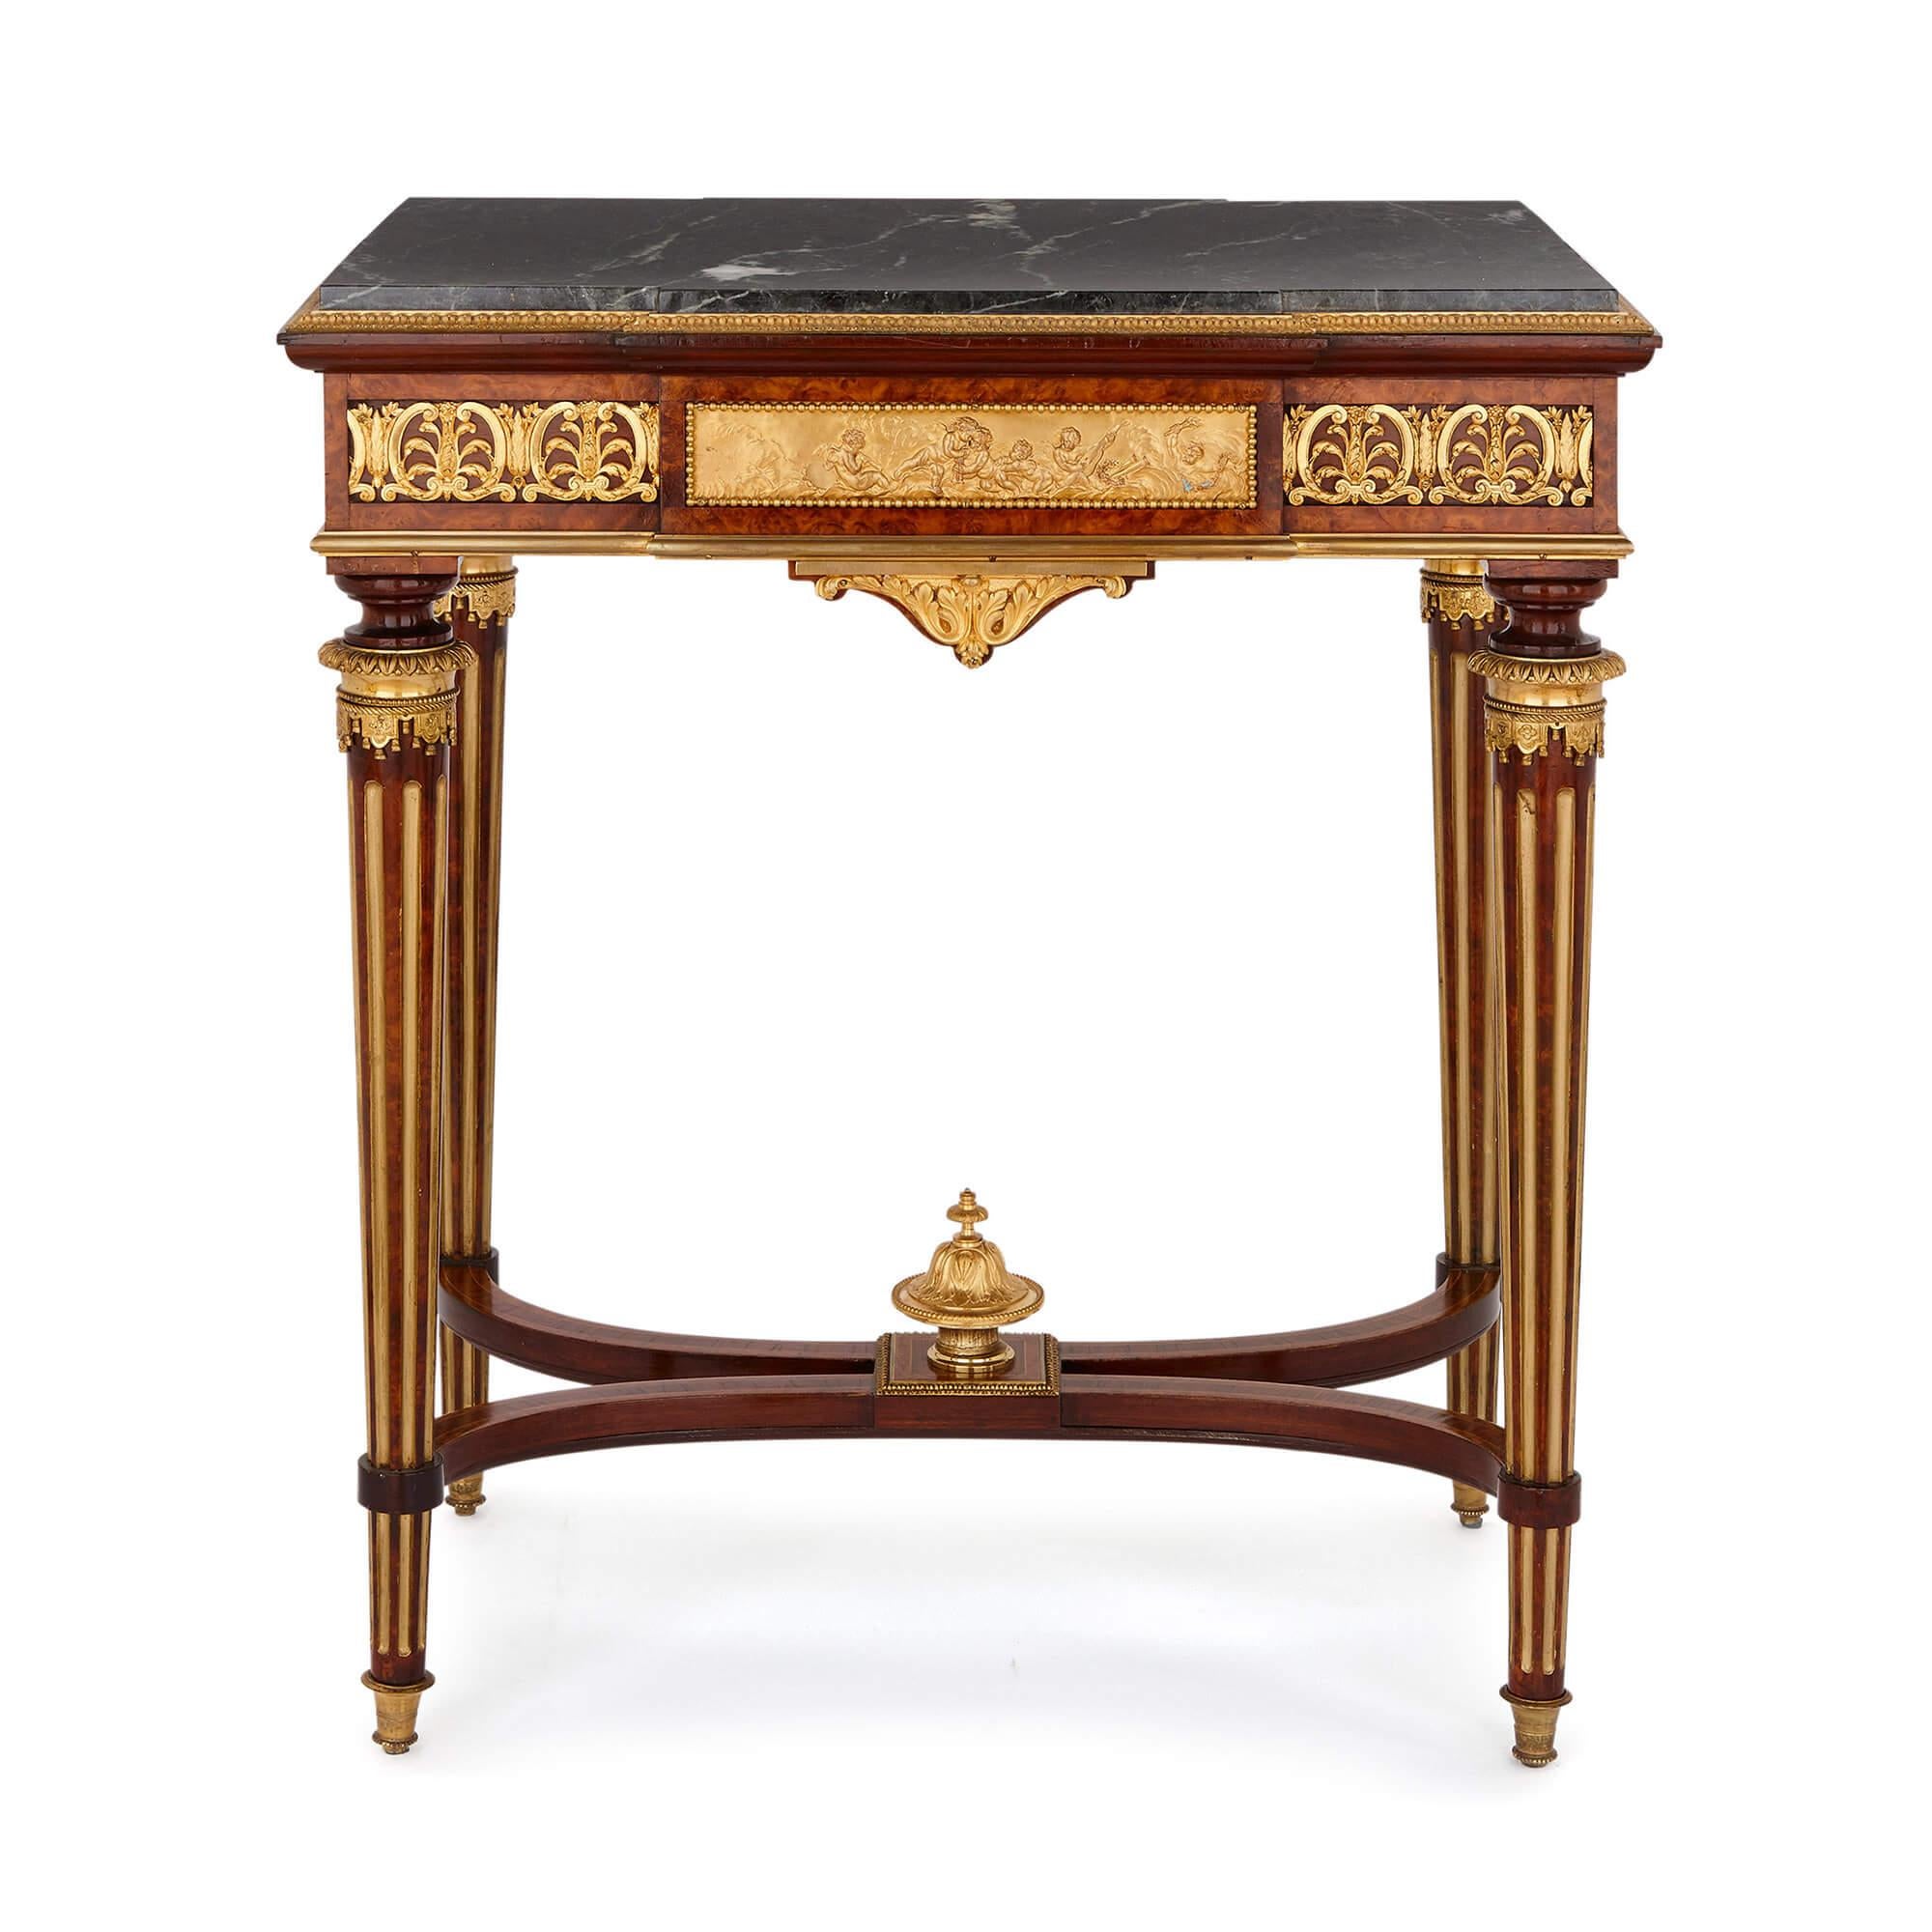 This fine and grand side table is built by one of the most esteemed makers of the 19th century, Henri Picard, and is decorated with exquisite gilt bronze mounts and topped with stylish veined green marble. The table is set on four tapered legs,